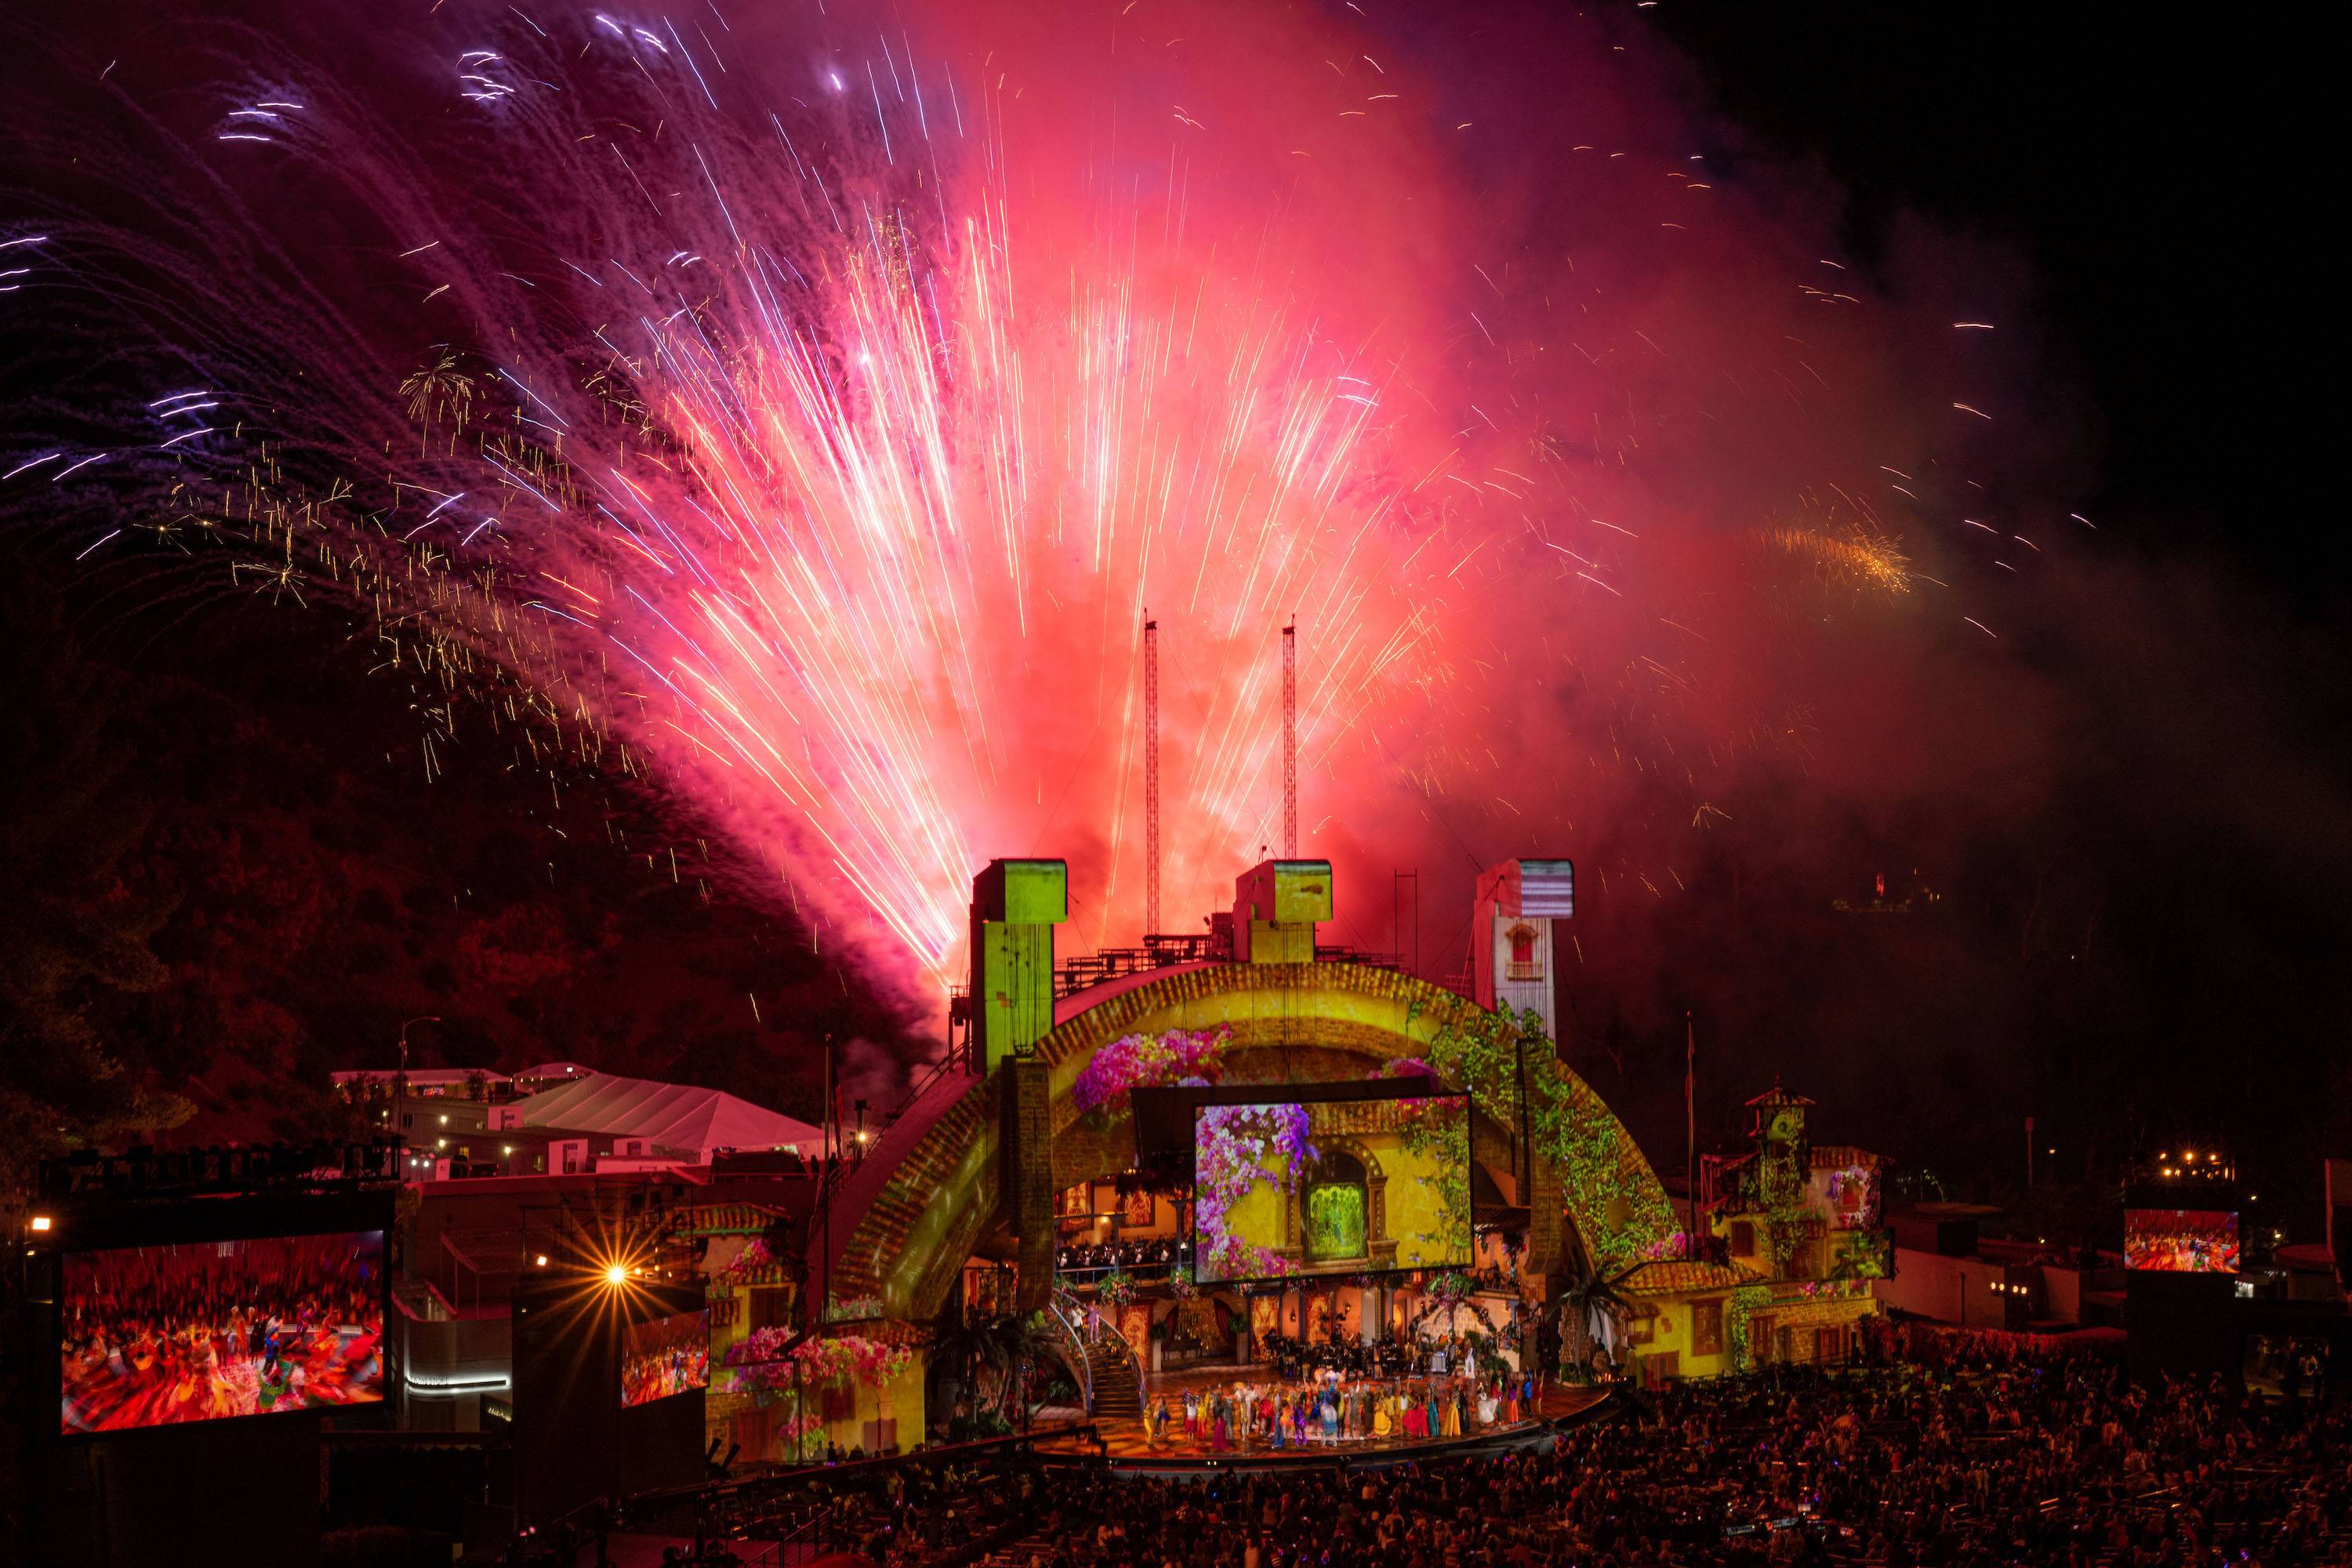 Fireworks go off during the live-to-film concert experience Encanto at the Hollywood Bowl. Encanto at the Hollywood Bowl, from Disney Branded Television, will premiere on Dec. 28 only on Disney+. (Photo credit: Disney/Temma Hankin)